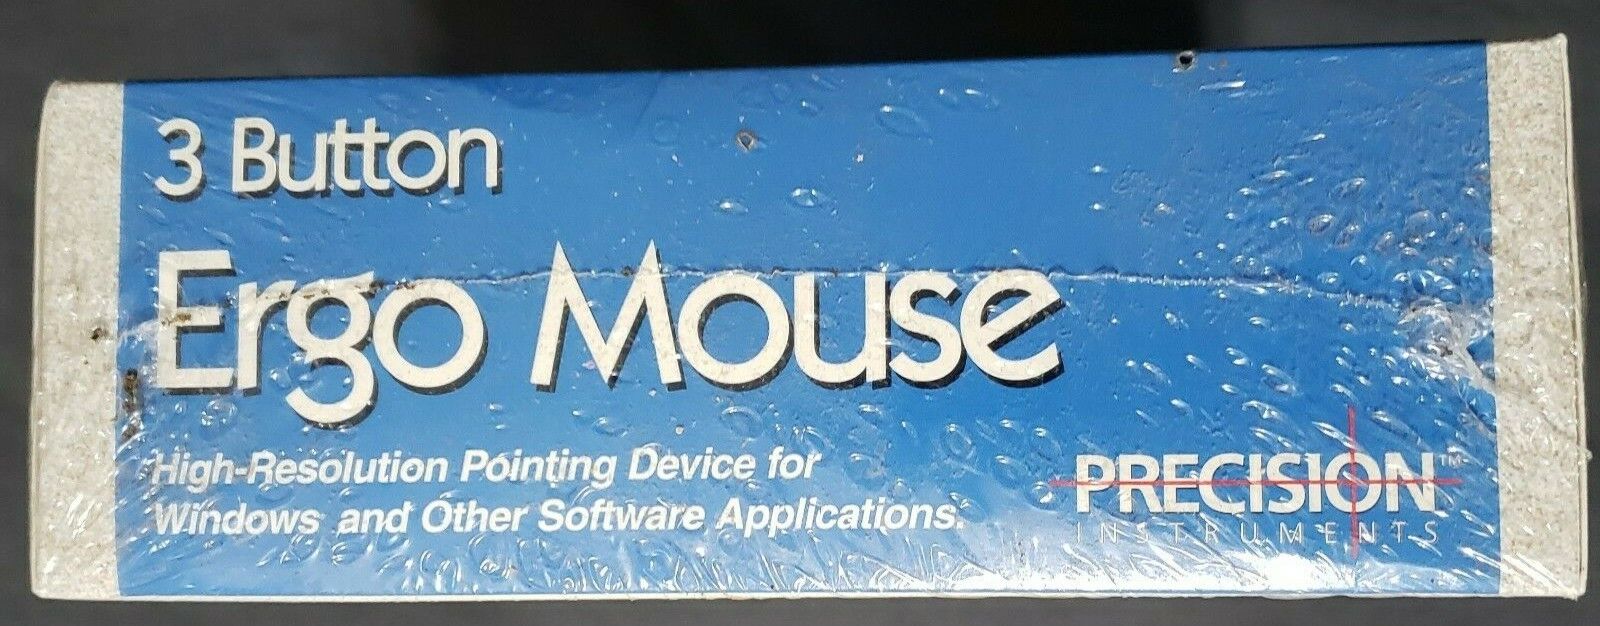 Sealed Precision Instruments 3 Button PS/2 Ergo Mouse